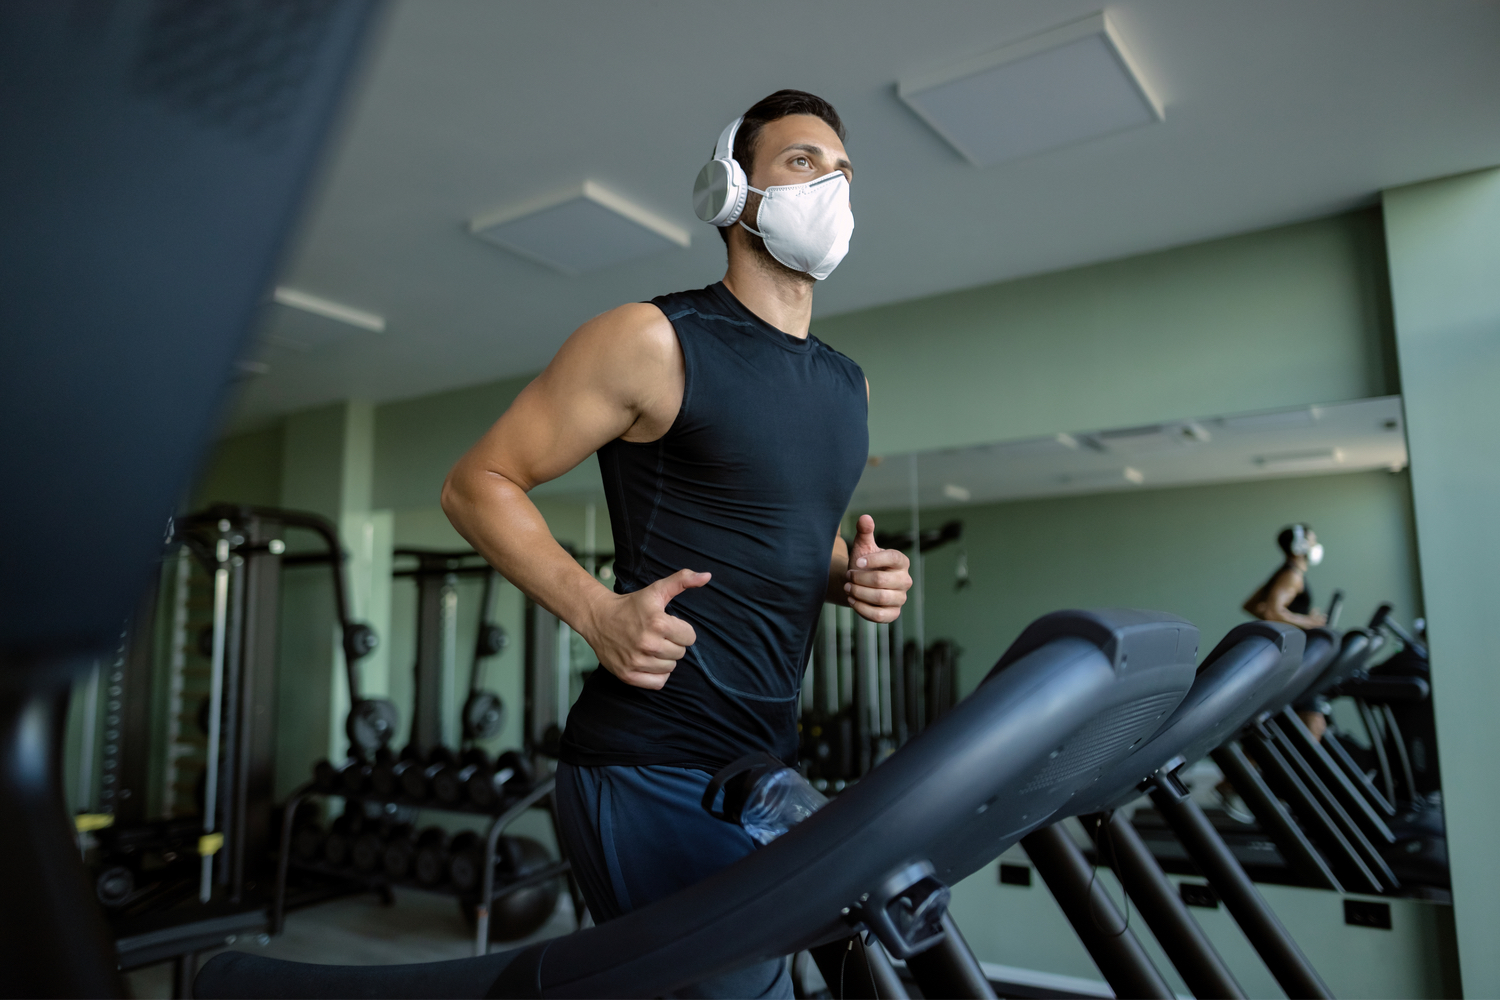 Tips for Going Back to the Gym After Quarantine